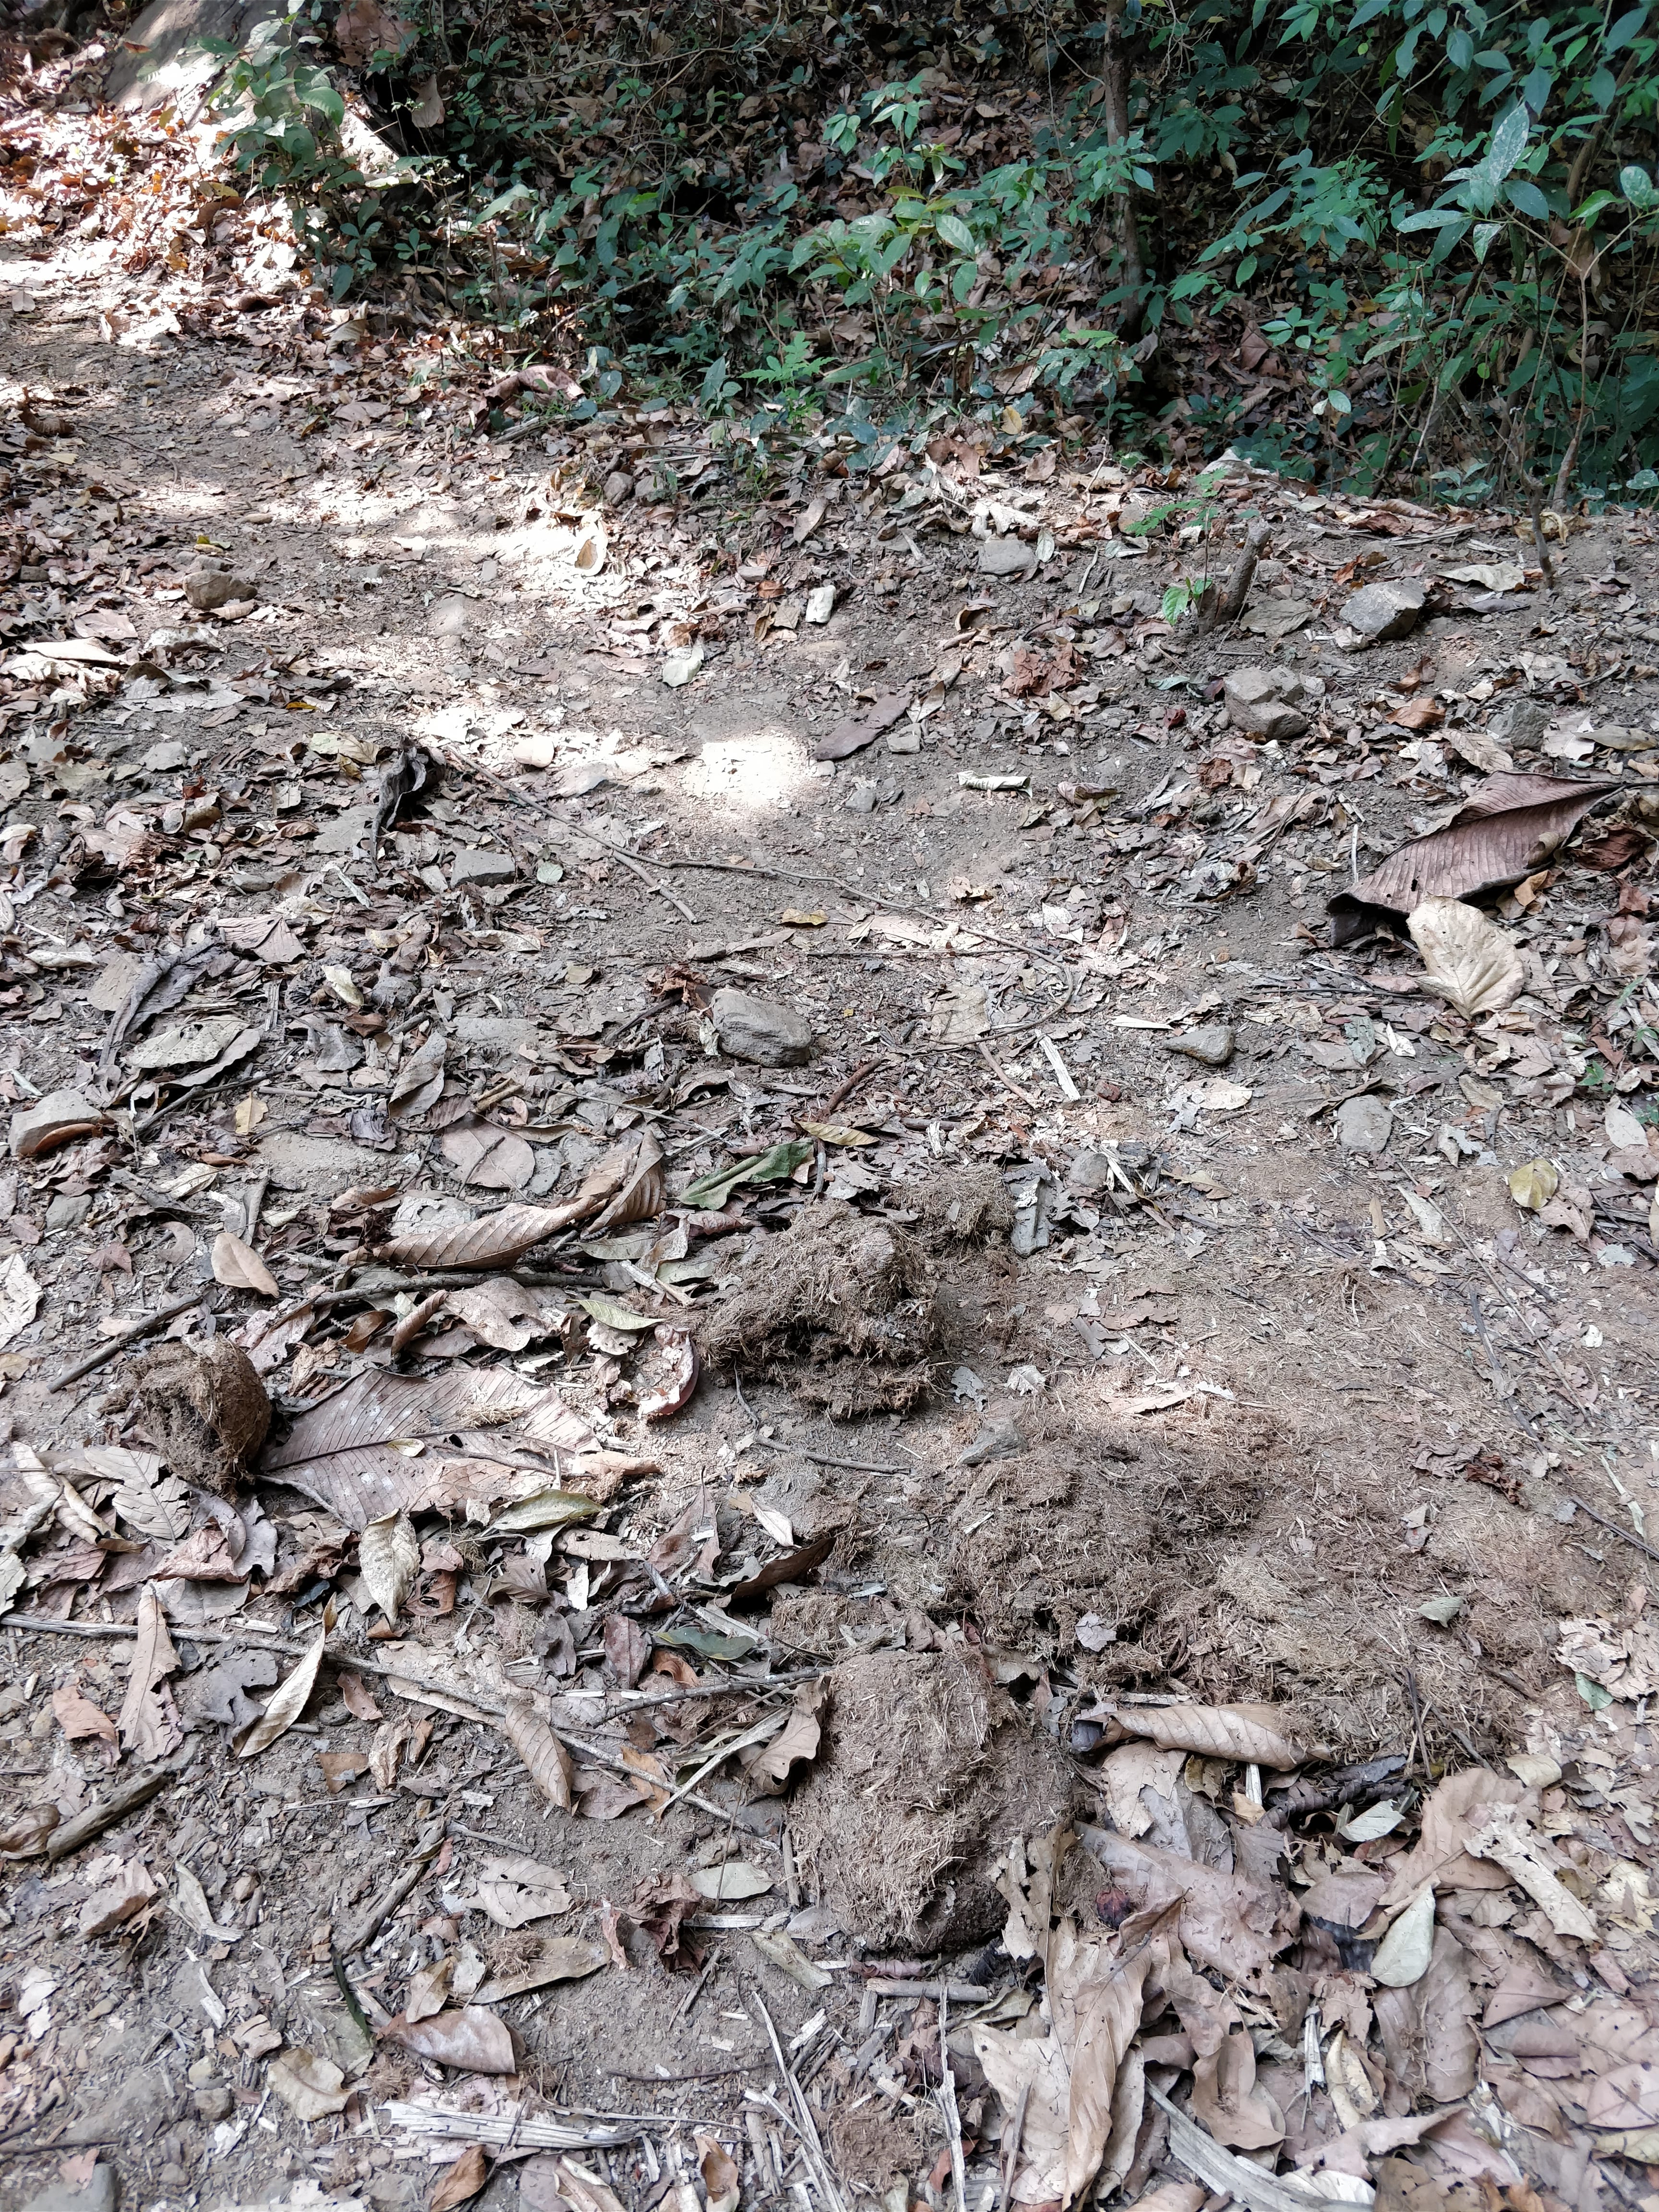 elephant dung on the forest trek trail